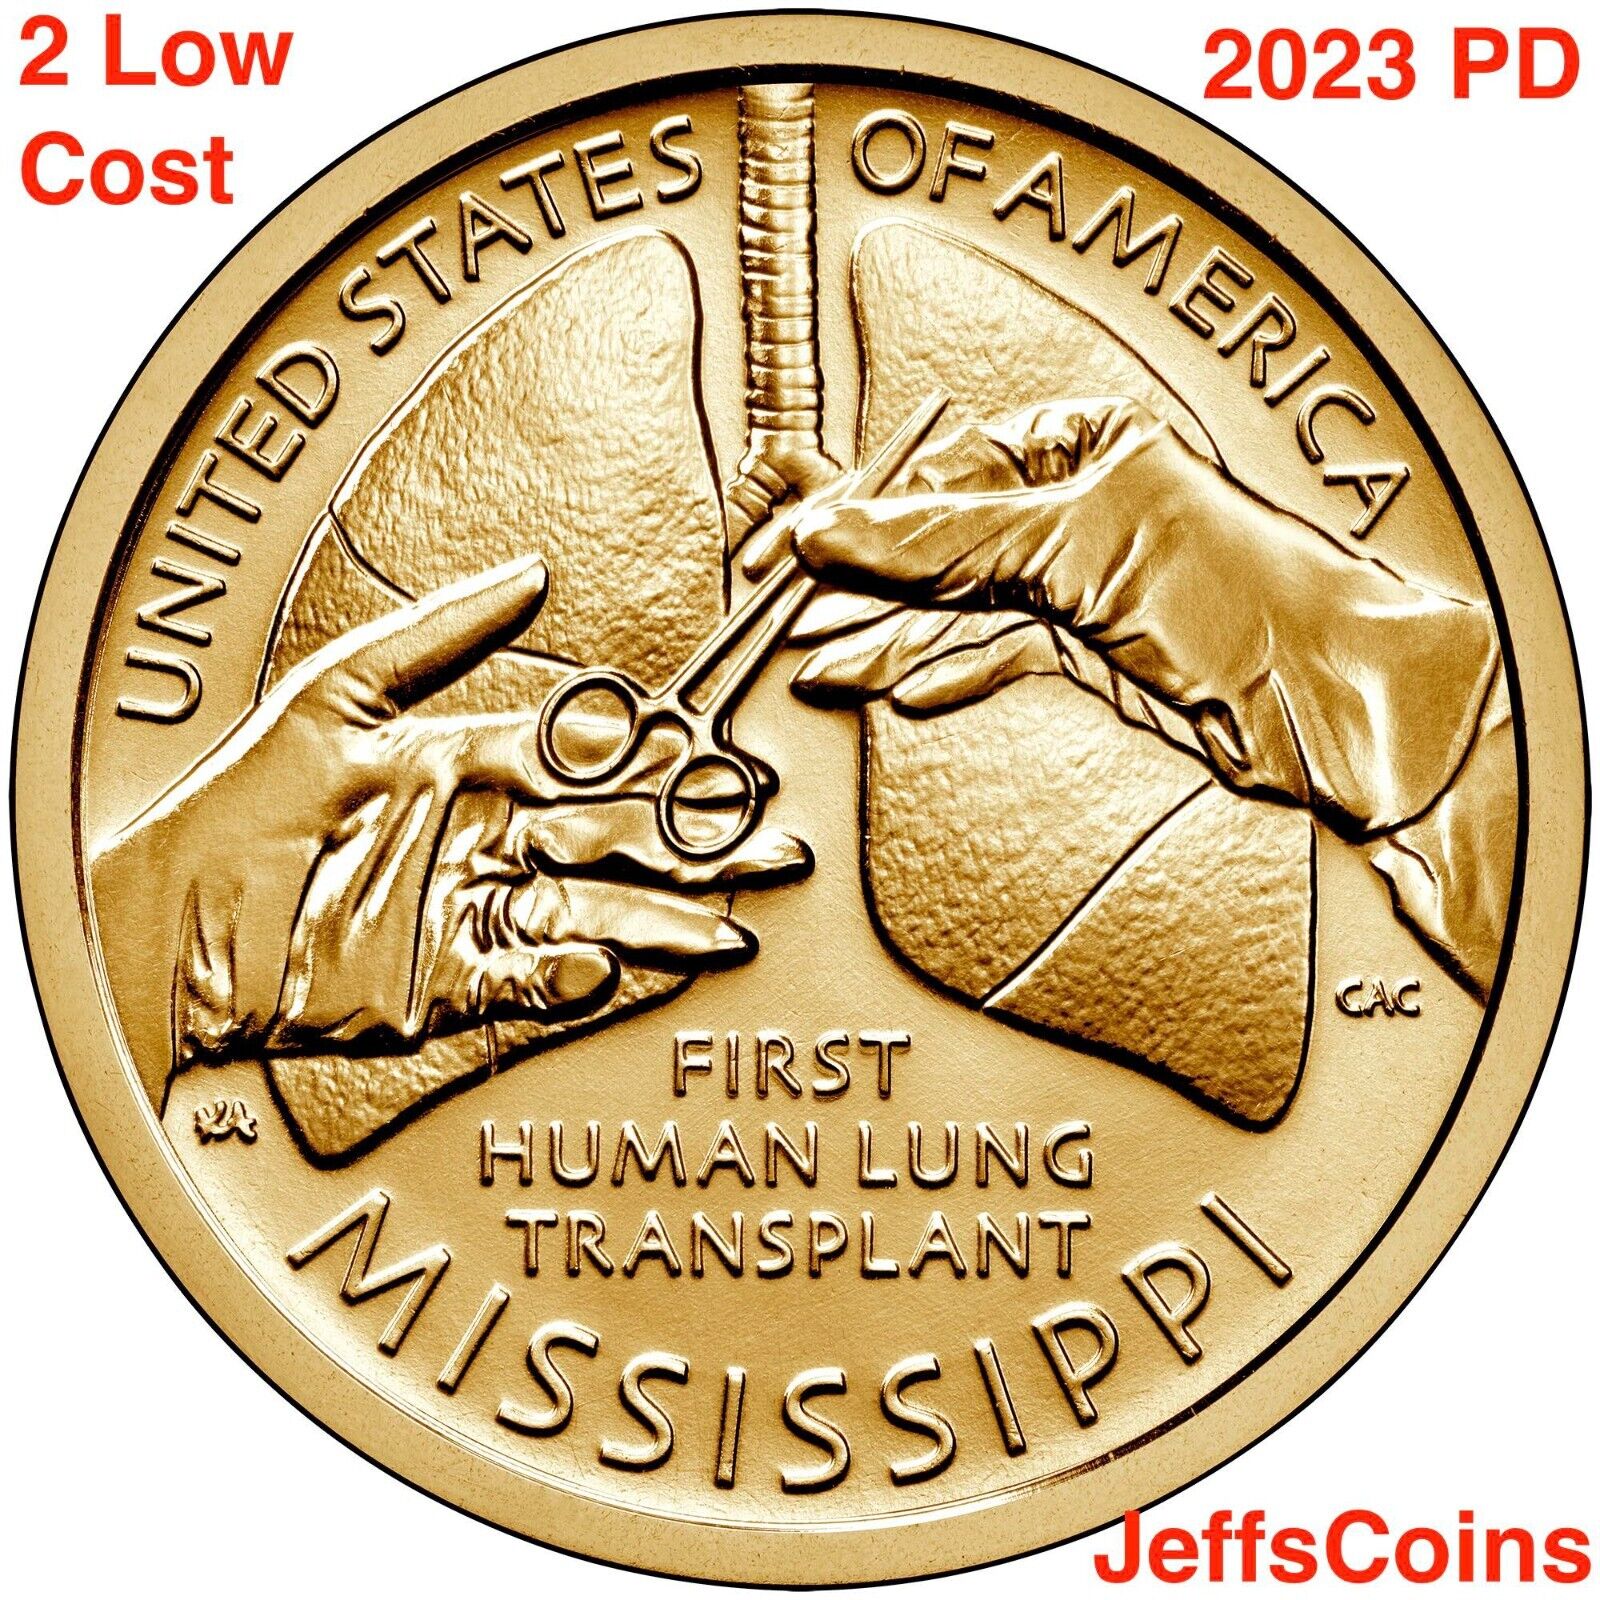 2023 PD Innovation Dollars All 8 Set OH IN LA MS Low Cost P D Railroad to Lung $ Без бренда - фотография #2